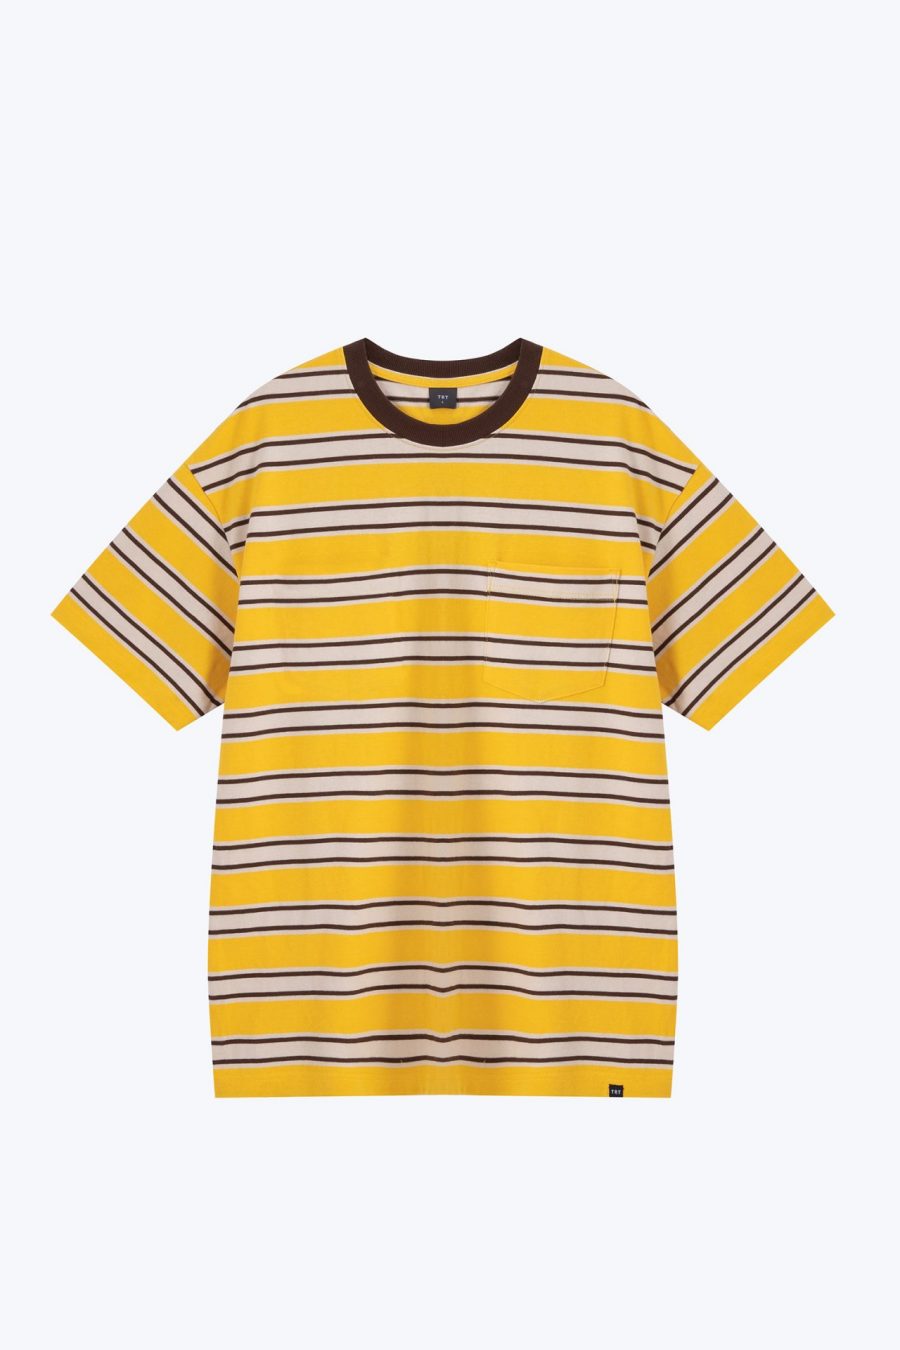 MT900277D Jersey Multi colour Wide Striped Tee YELLOW STRIPES